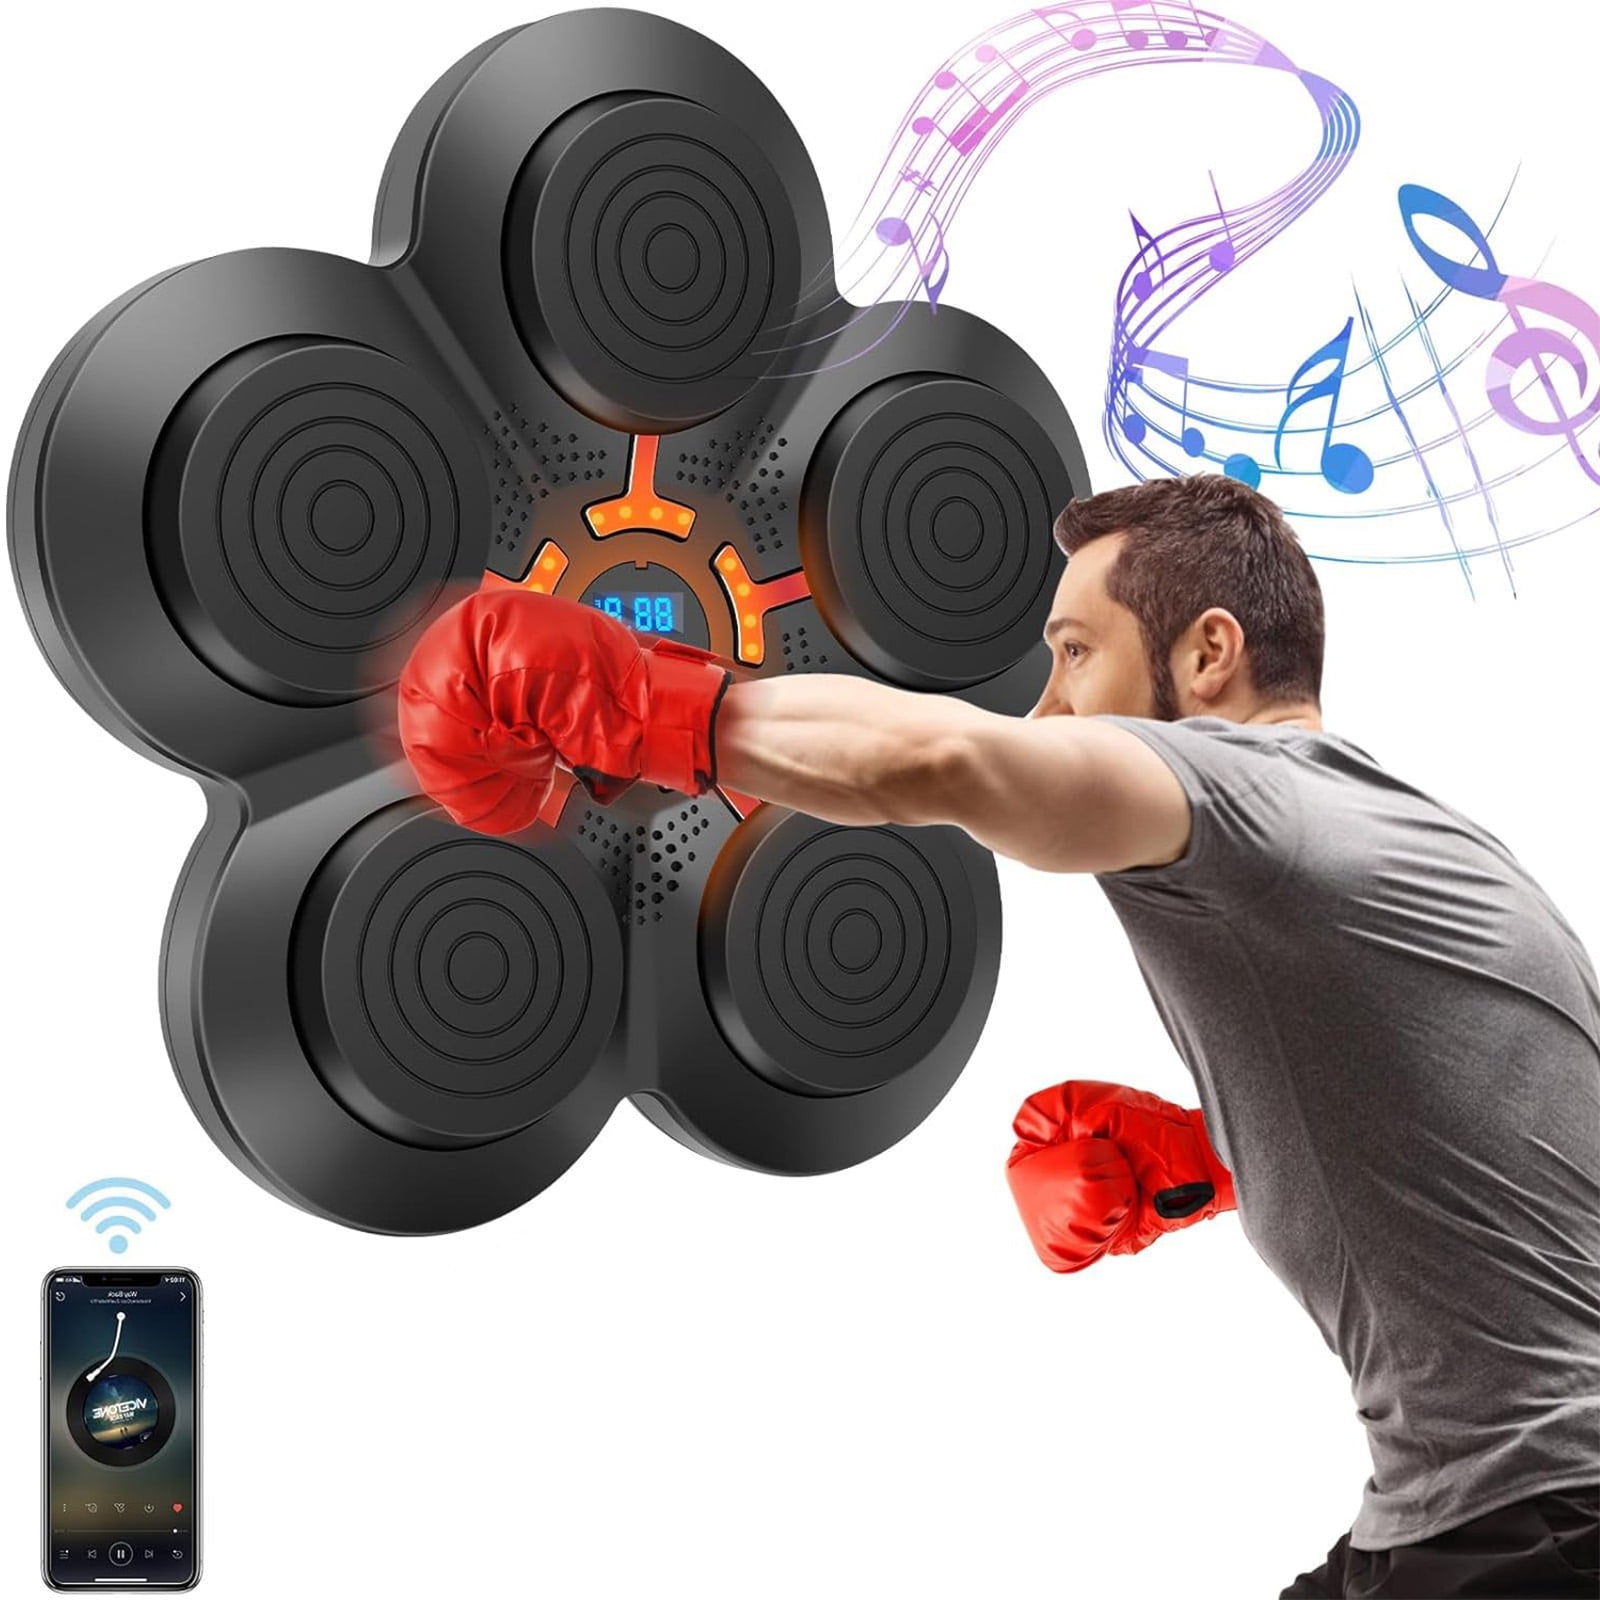 Musical boxing machine for exercise and fun😍. #viral